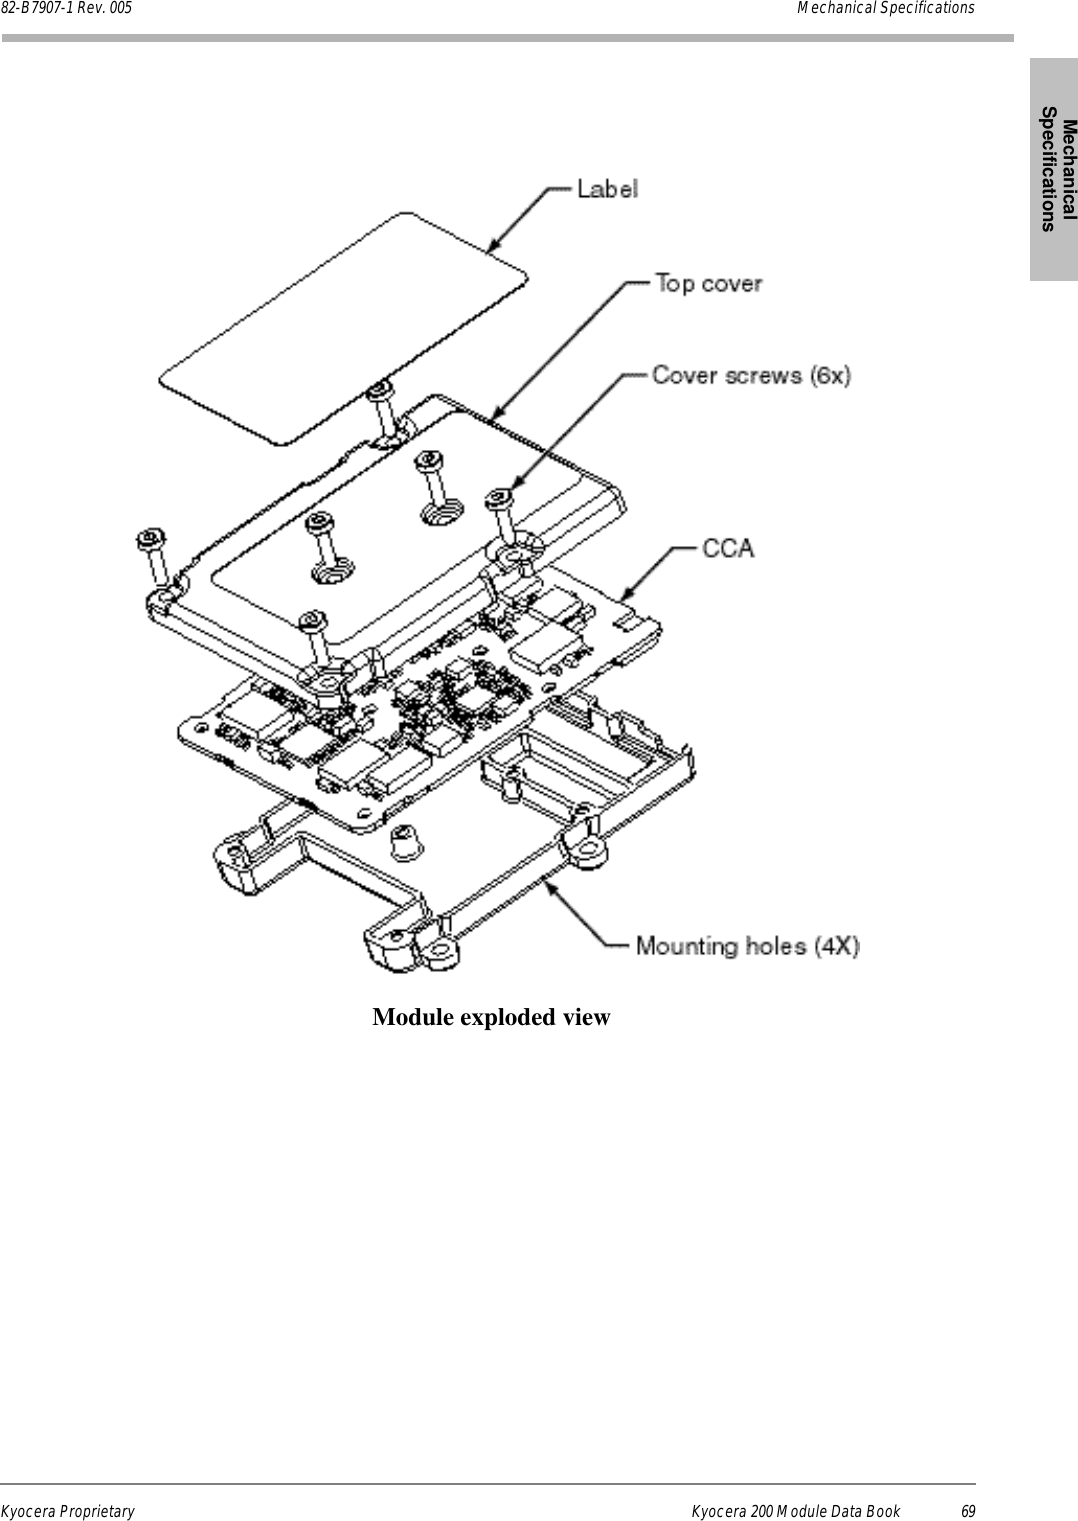 Mechanical SpecificationsMechanical SpecificationsMechanical SpecificationsMechanical SpecificationsMechanical SpecificationsKyocera Proprietary Kyocera 200 Module Data Book 6982-B7907-1 Rev. 005 Mechanical Specifications Module exploded view